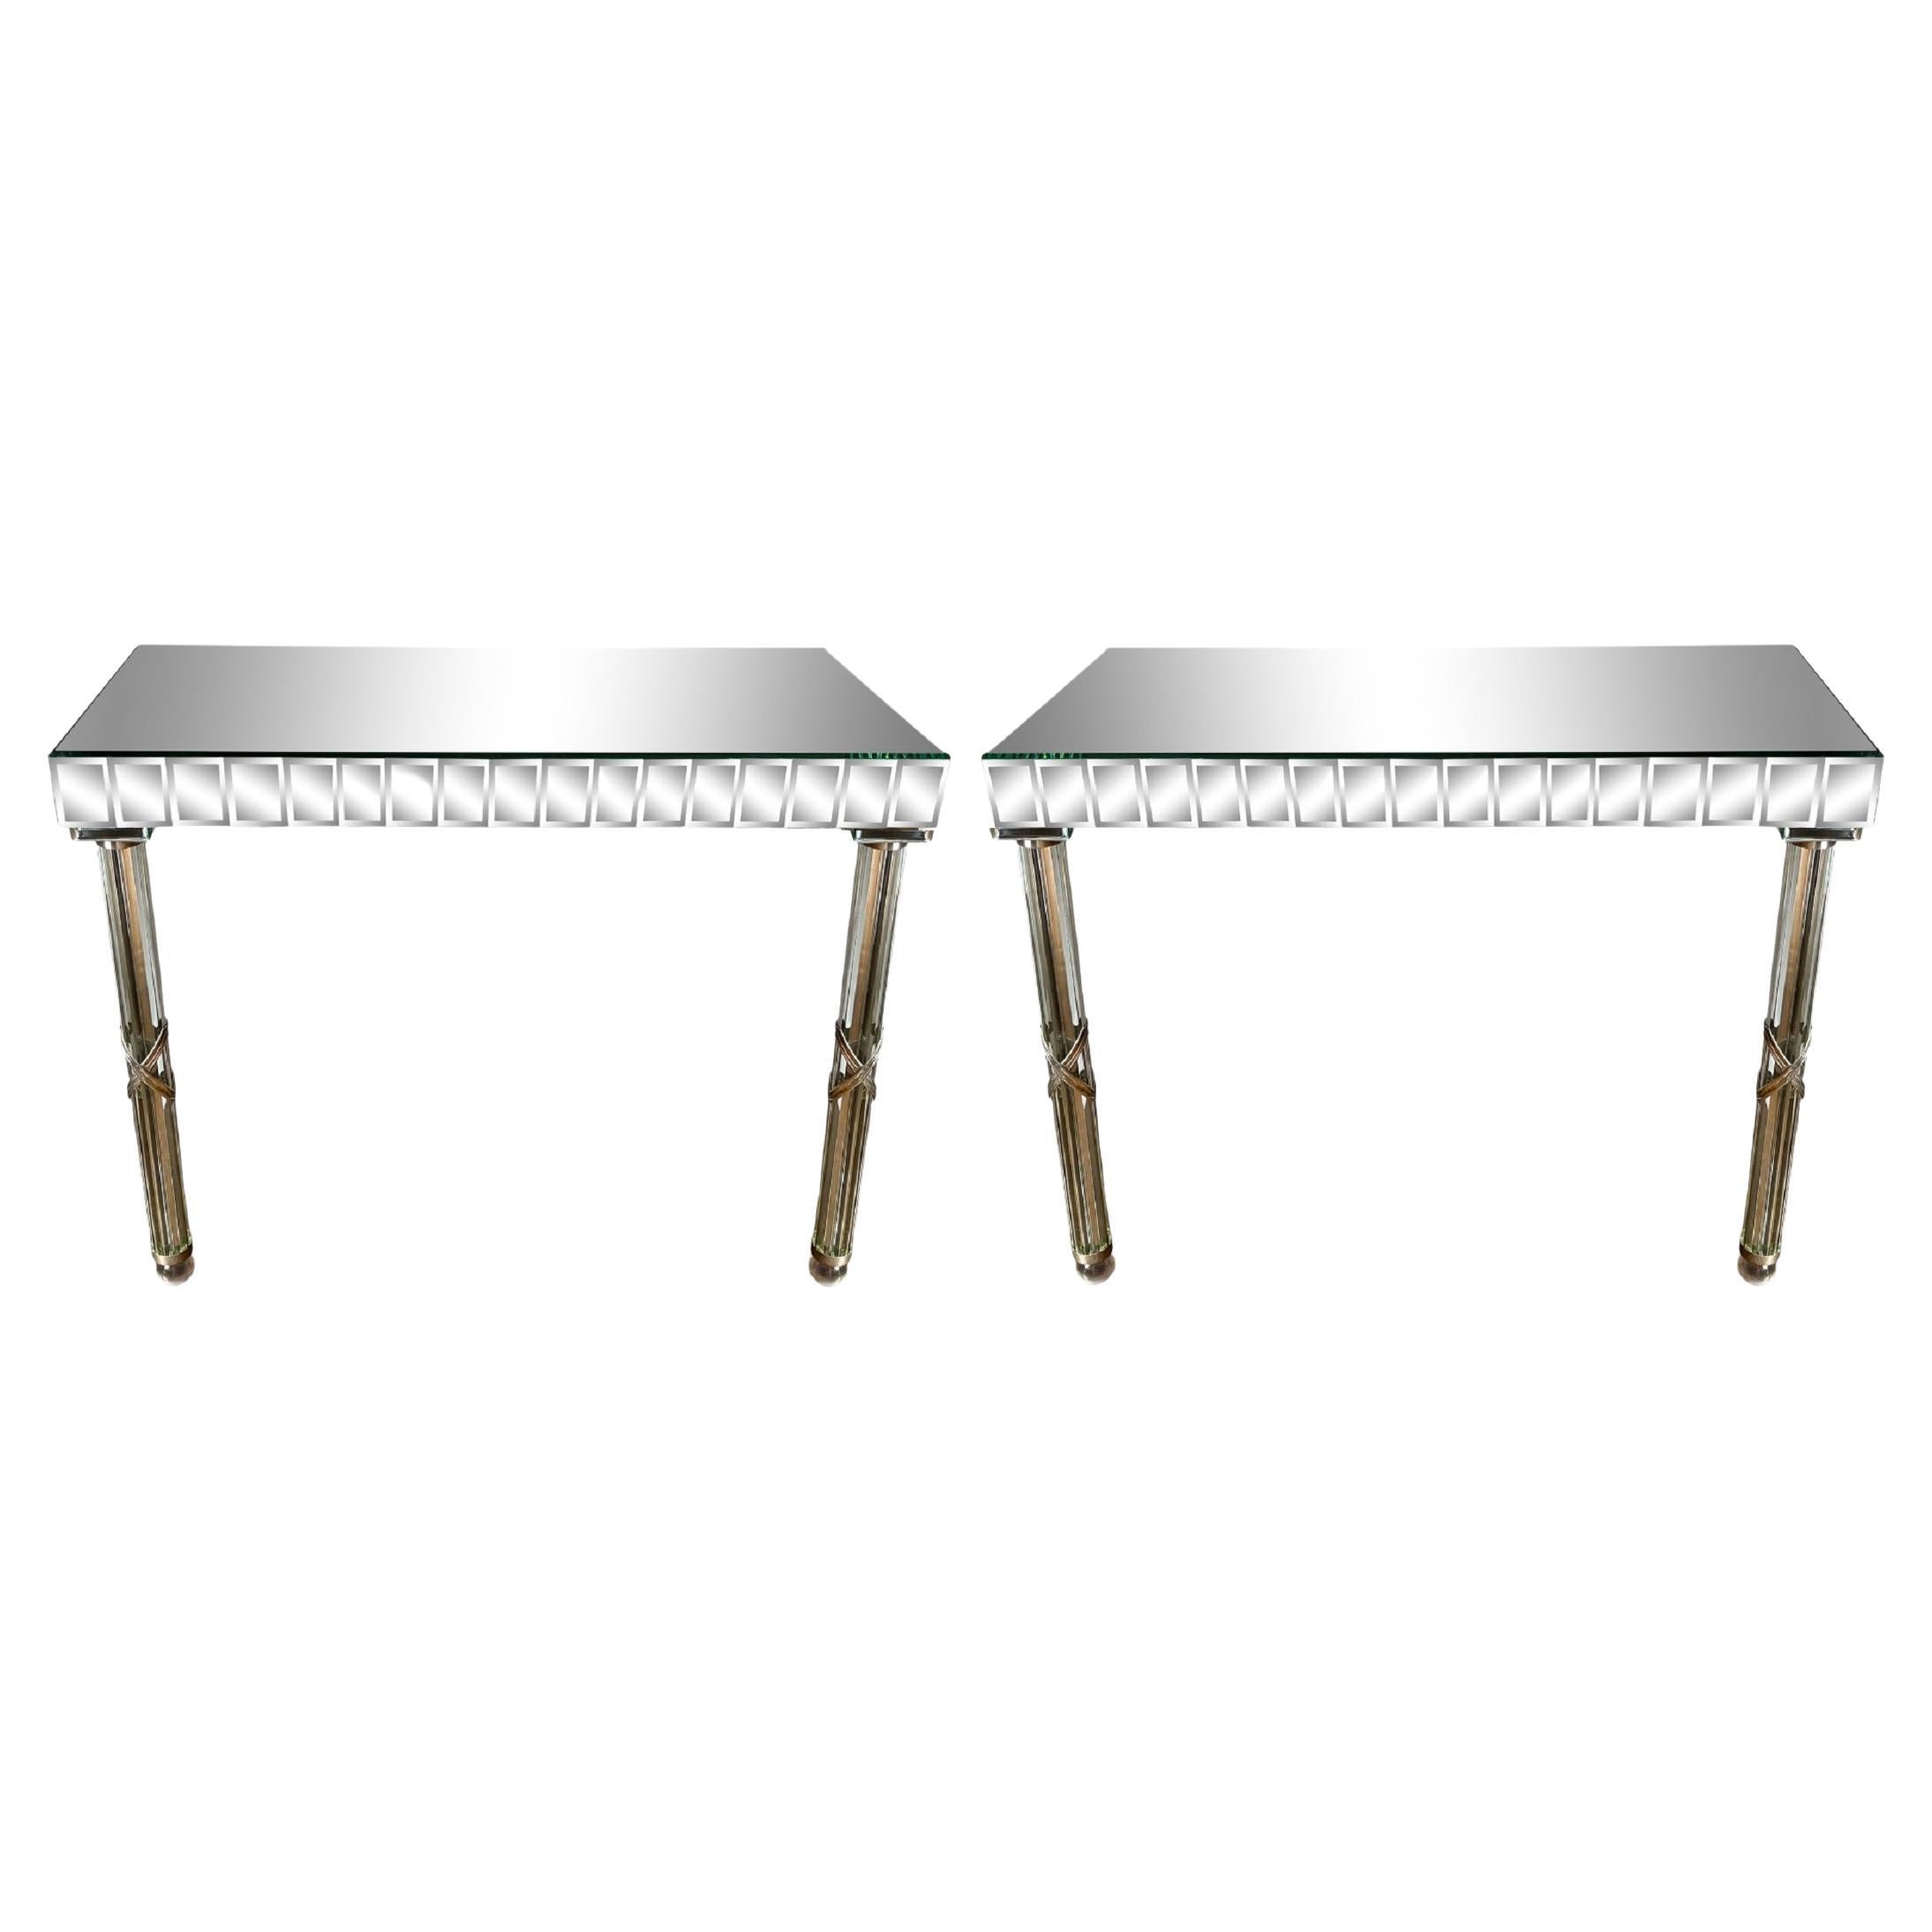 Pair of French Art Deco Mirrored Console Table with Glass Rod Legs, 1940s